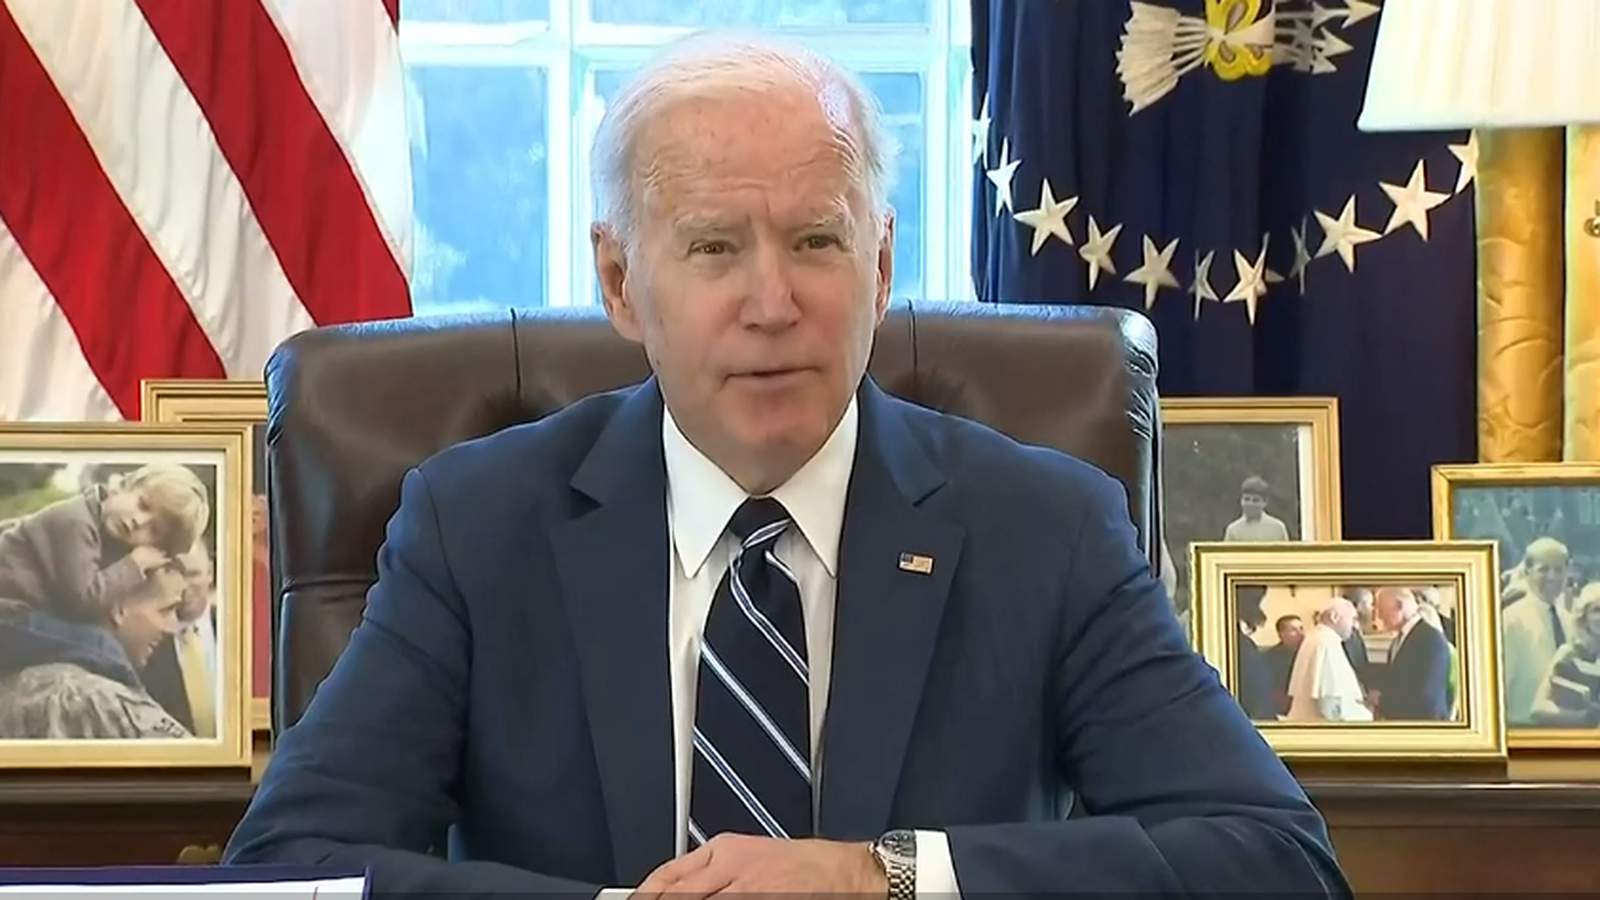 WATCH: Pres. Biden signed the American Rescue Plan into law